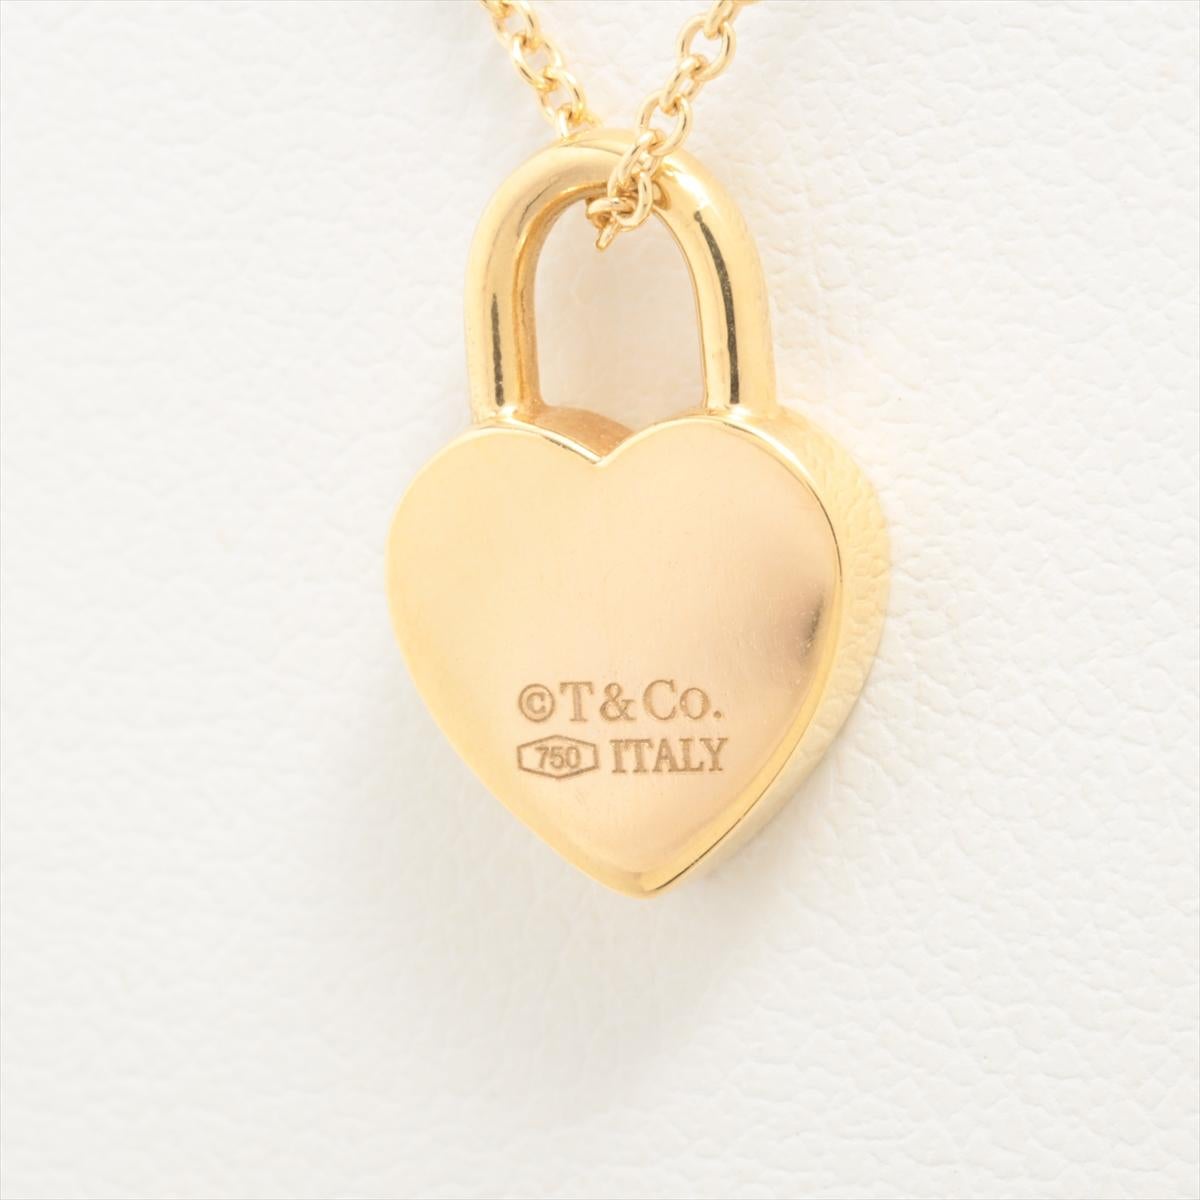 Tiffany & Co. Return To Tiffany Heart Lock Necklace Gold In Good Condition For Sale In Indianapolis, IN